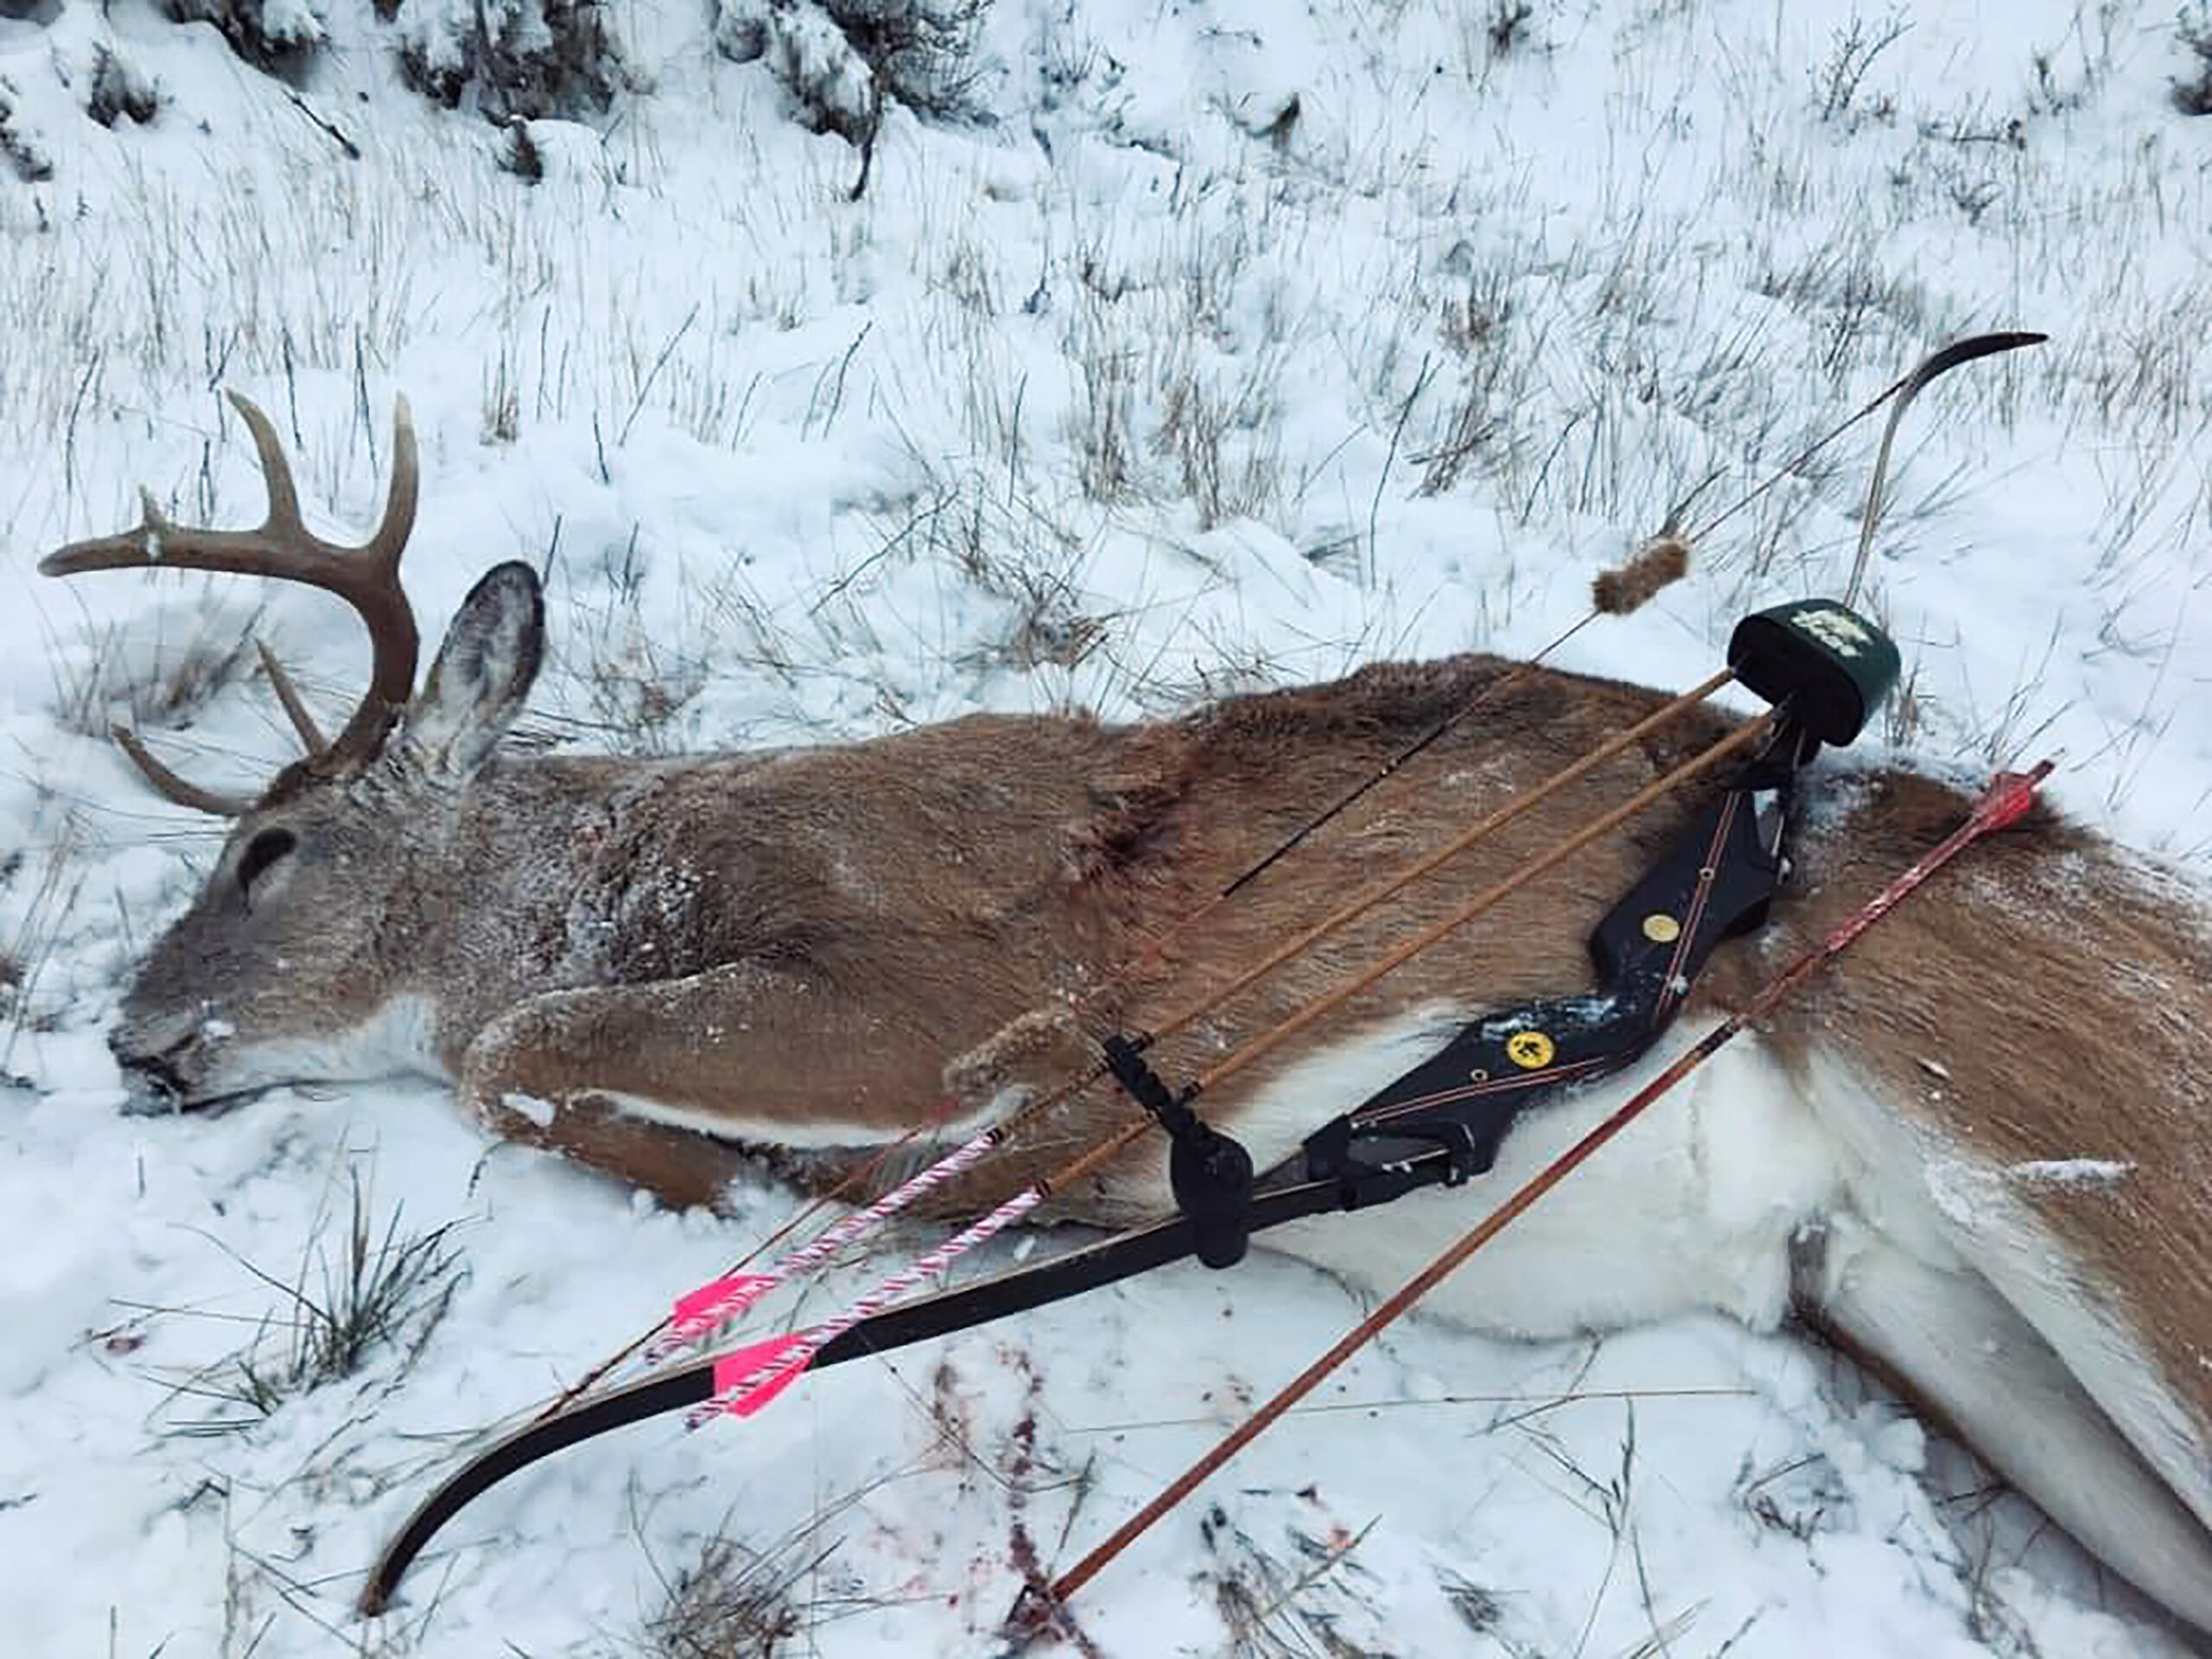 A whitetail buck in the snow with a traditional bow and pink arrows resting on its side.